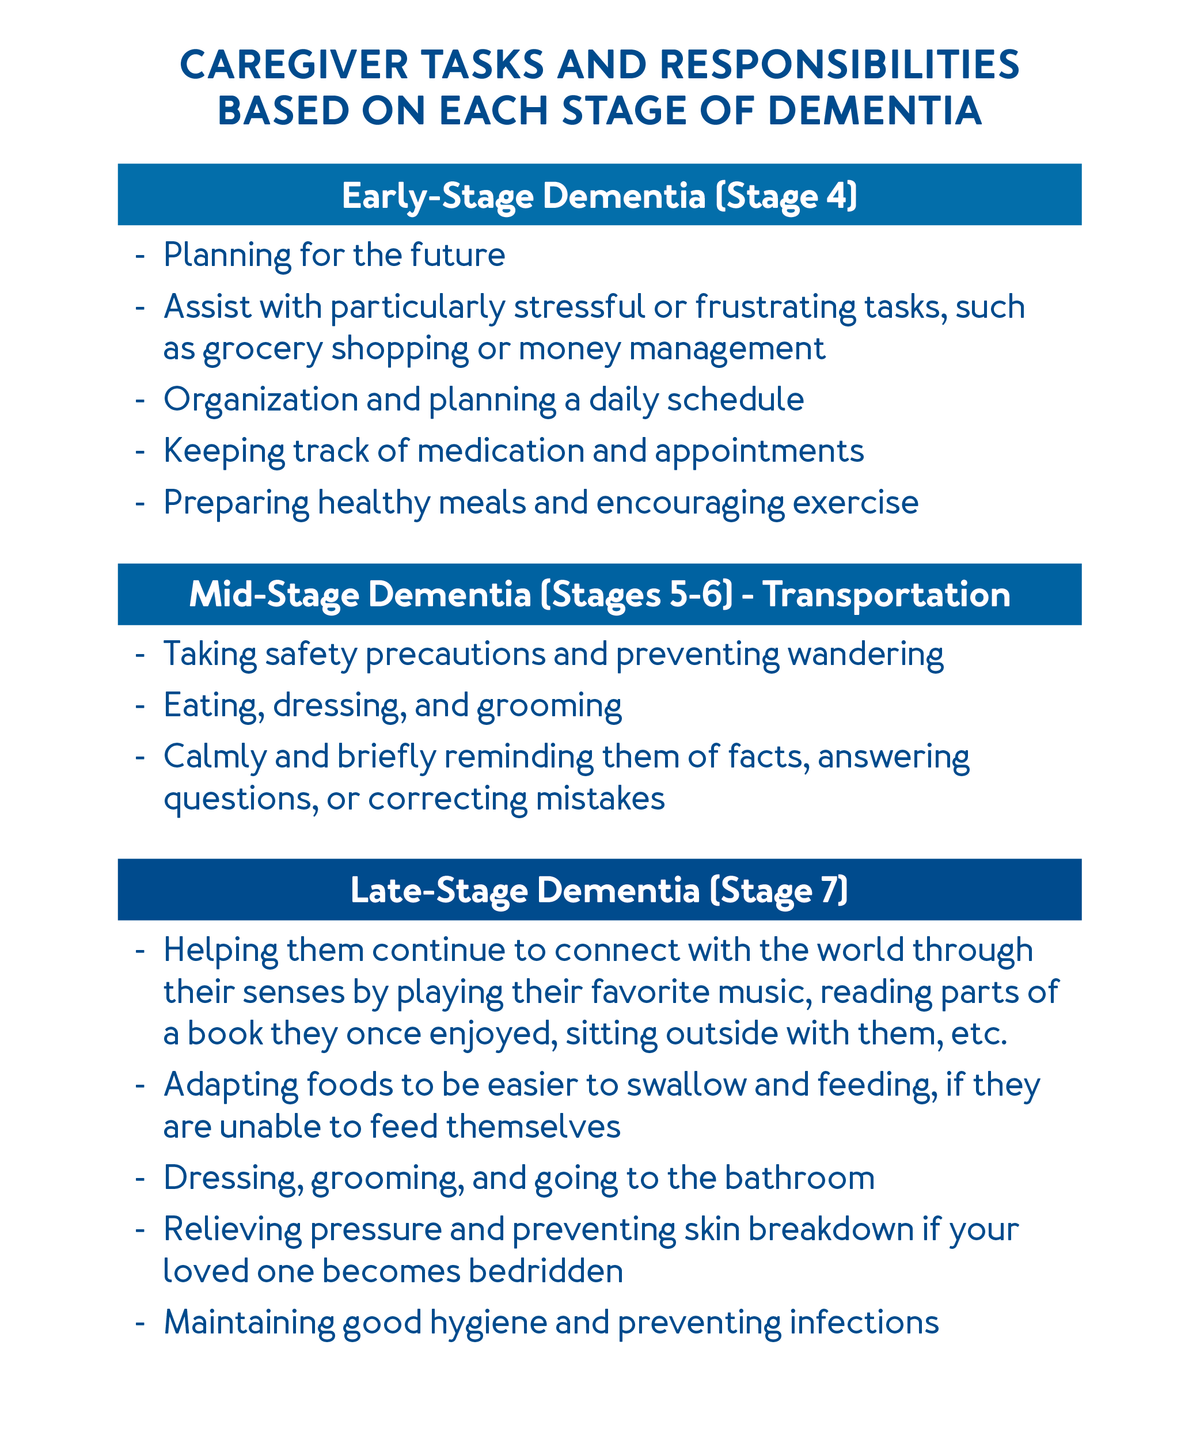 Caregiver Tasks and Responsibilities Based on Each Stage of Dementia , Further details are provided below.